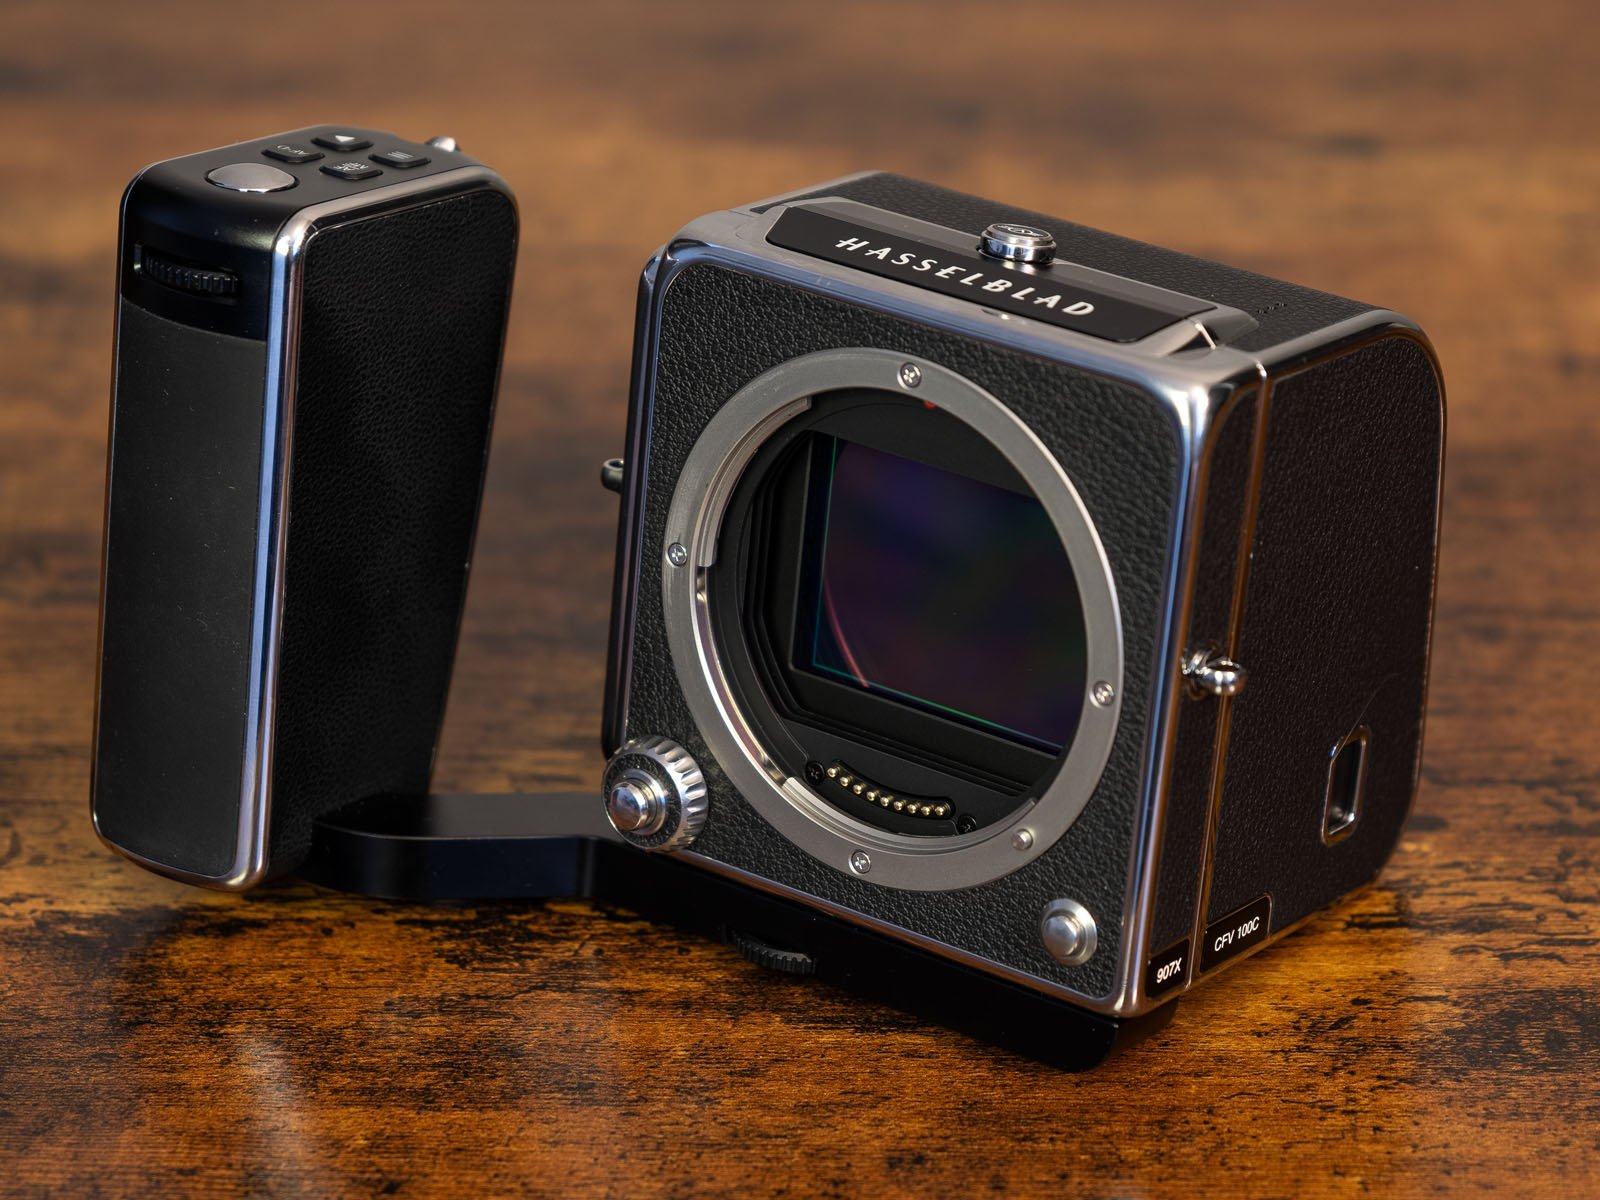 Hasselblad 907X CFV 100C Review